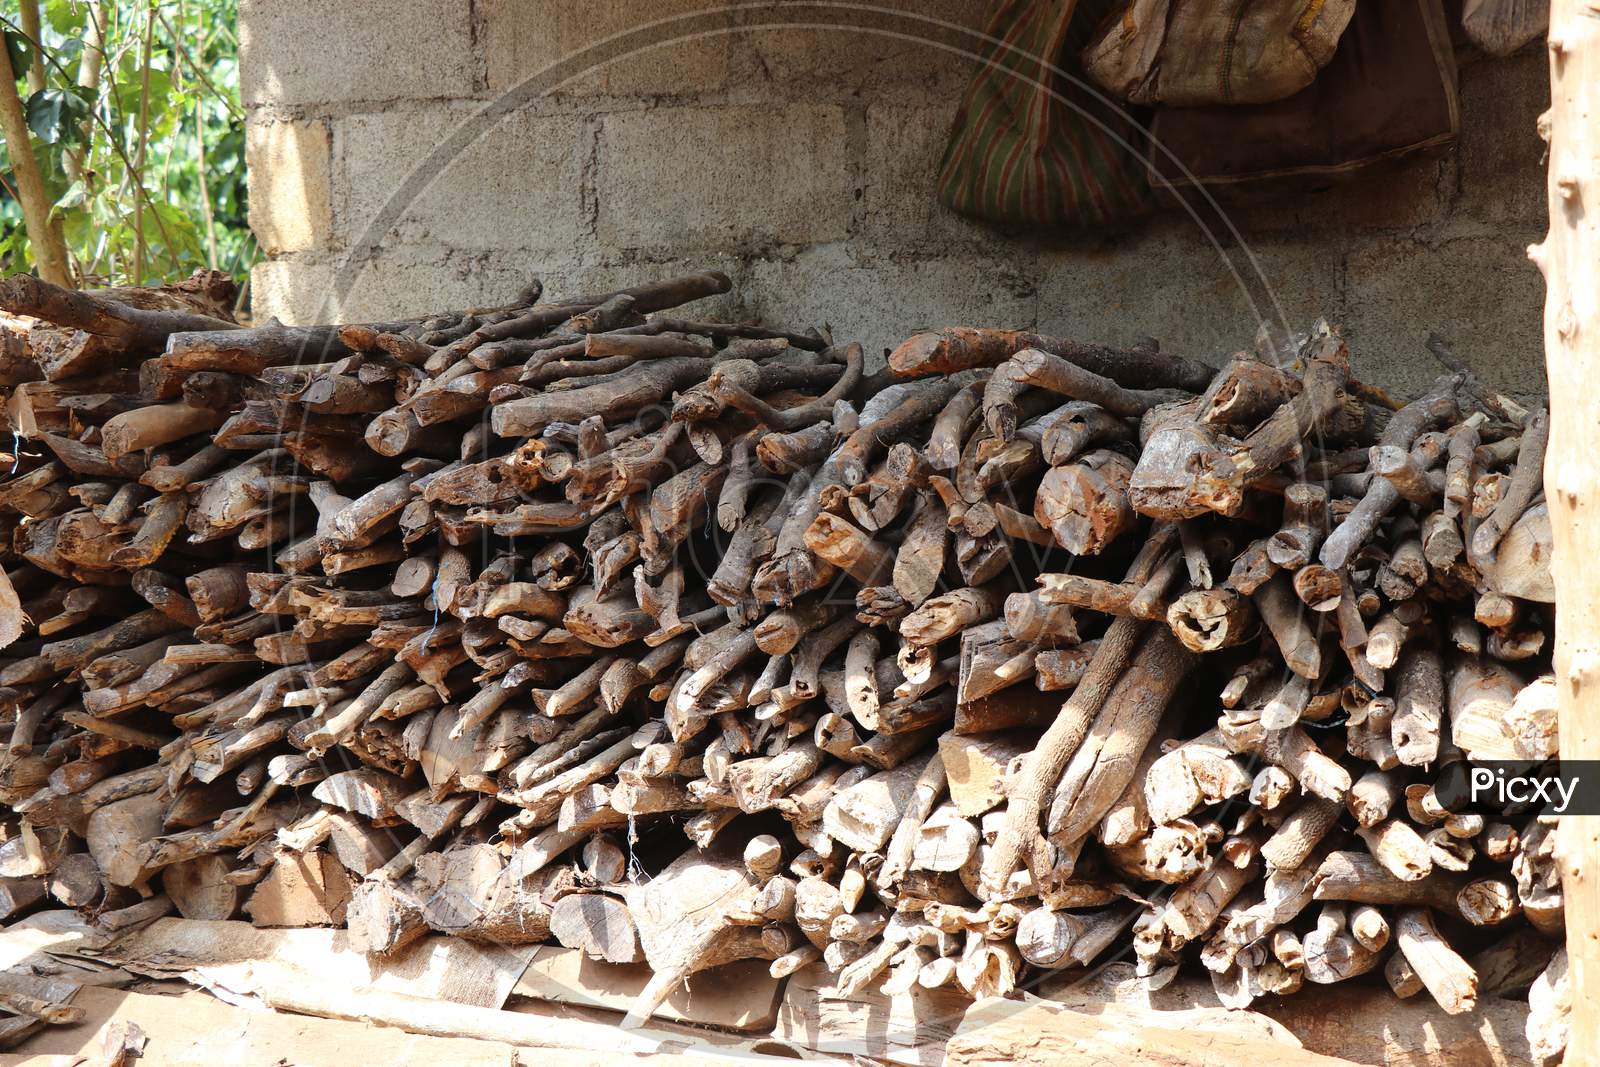 Pile Of Cut Wood Trunks Stocked For Burning In Winter